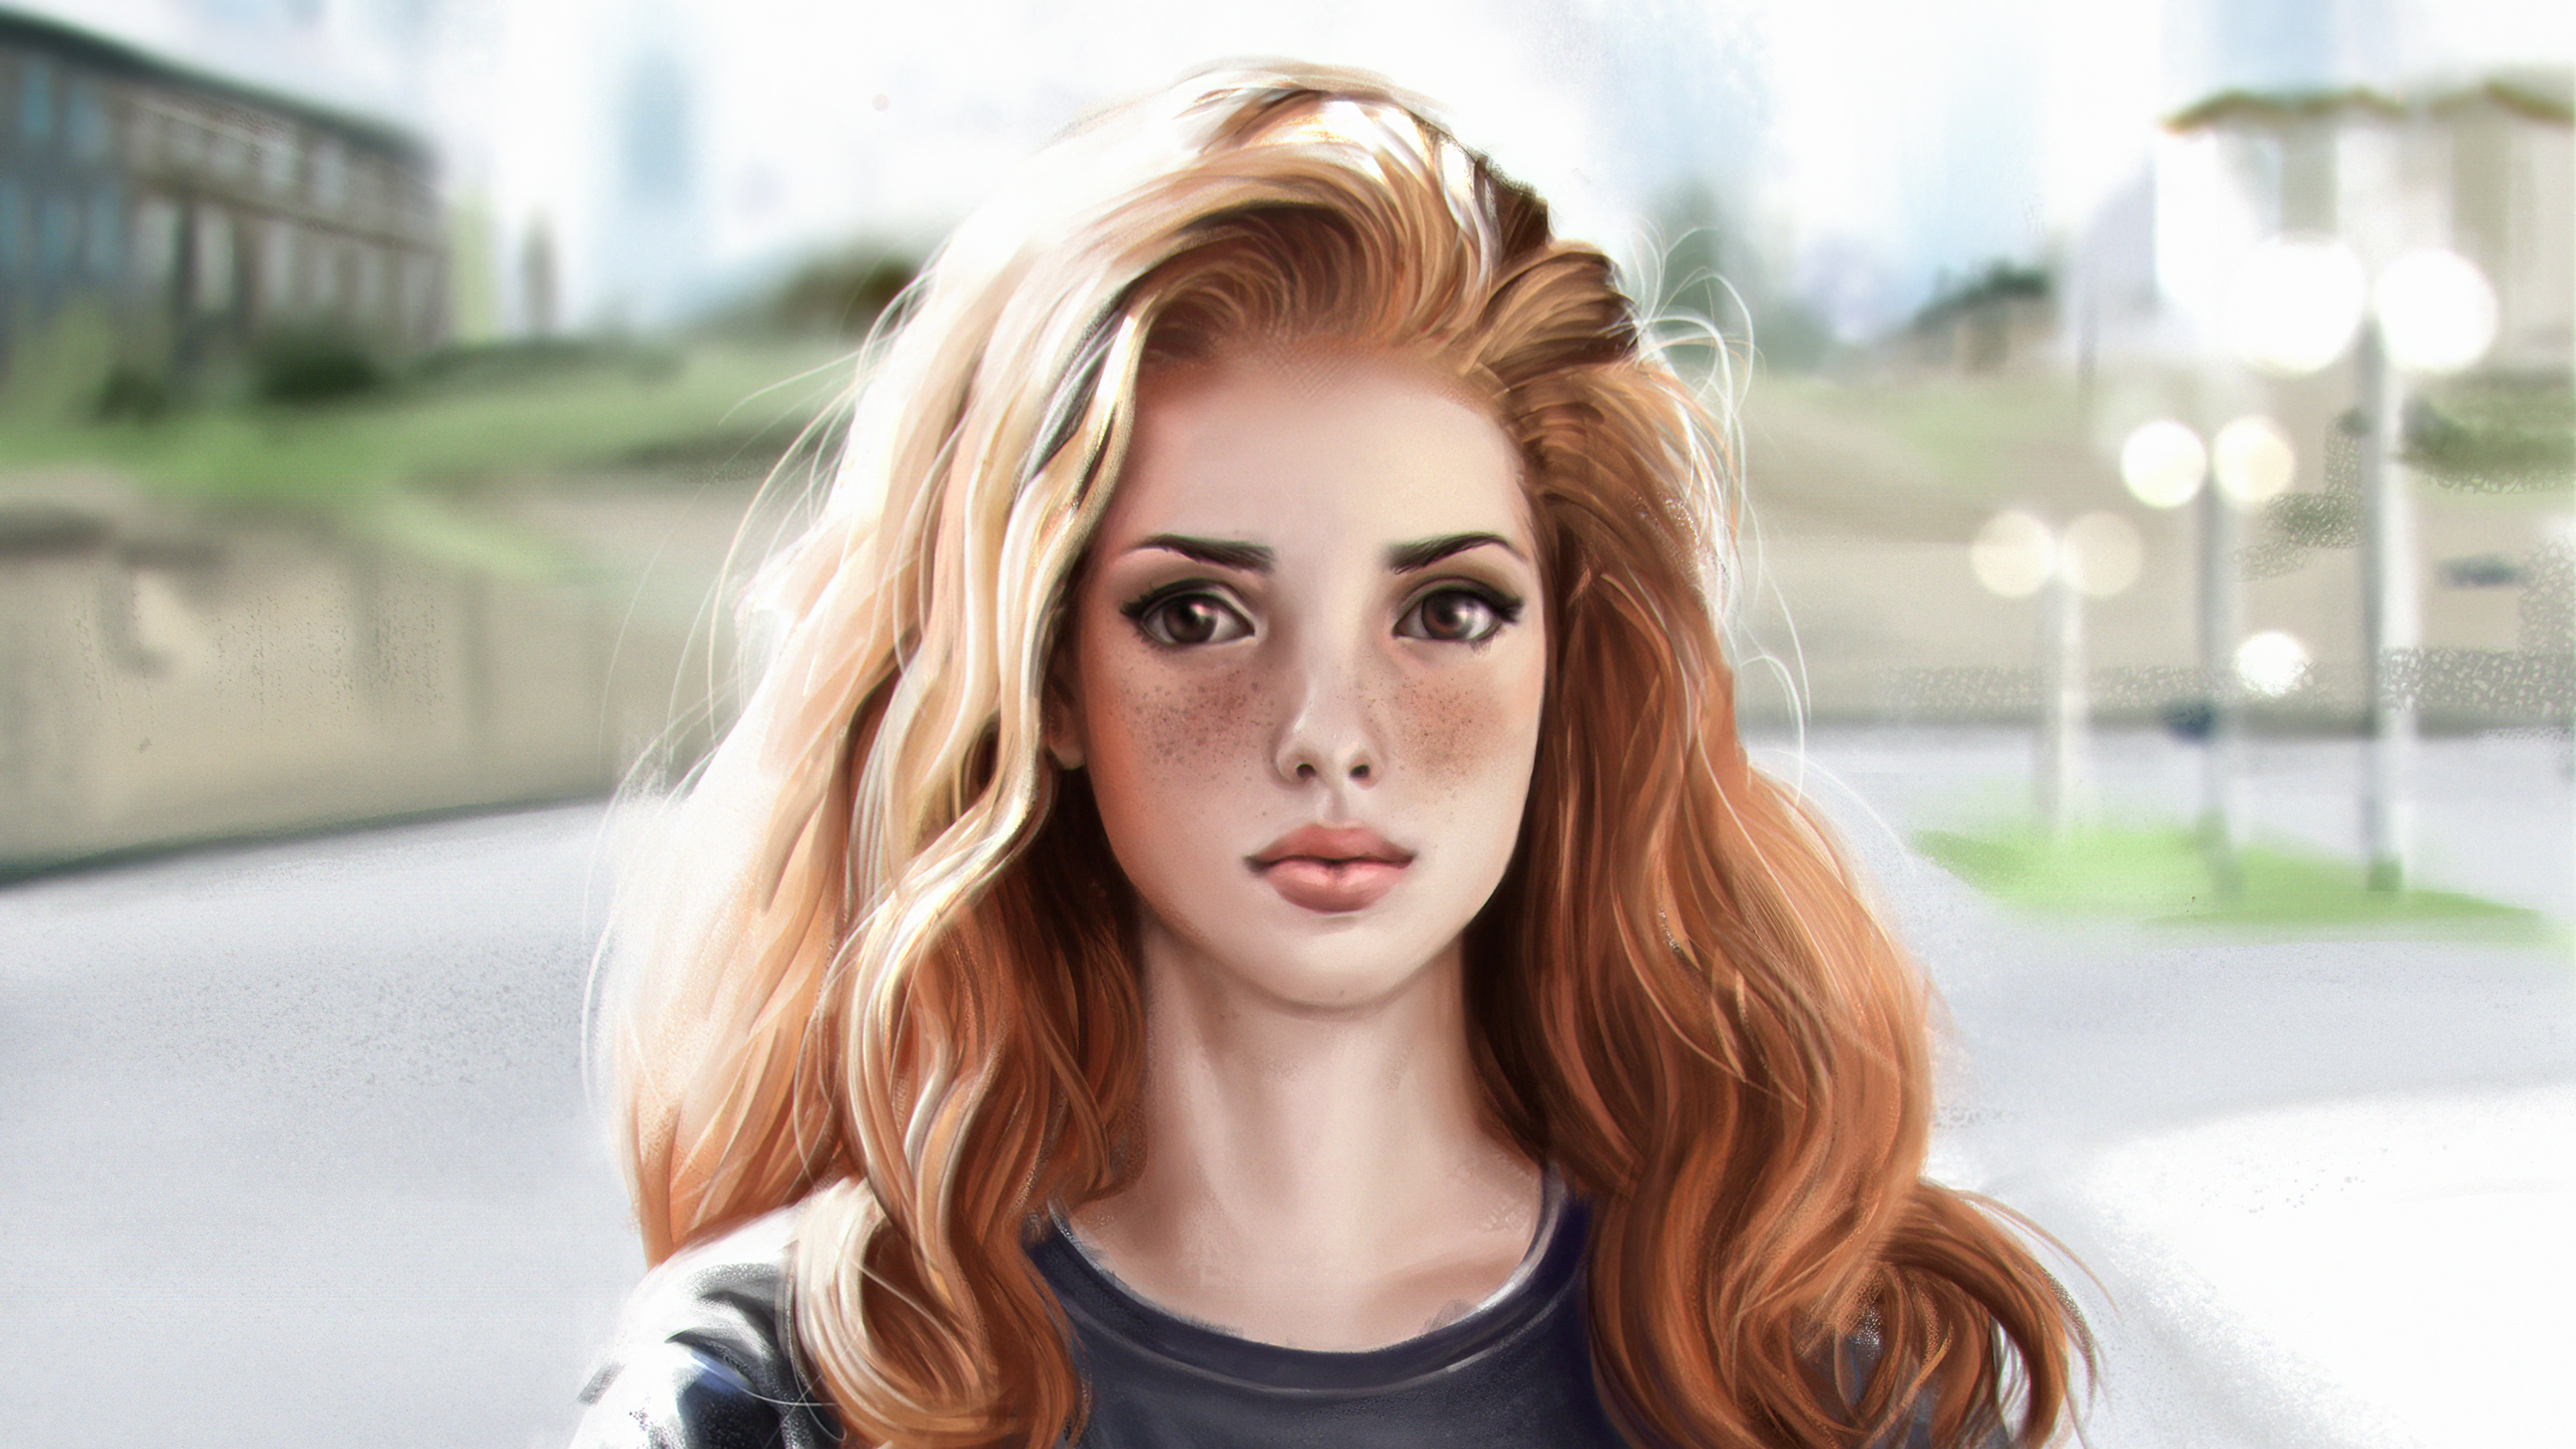 3840x2160 1280x1024 Redhead Girl Artistic Art 4k 1280x1024 Resolution HD 4k Wallpapers, Images, Backgrounds, Photos and Pictures